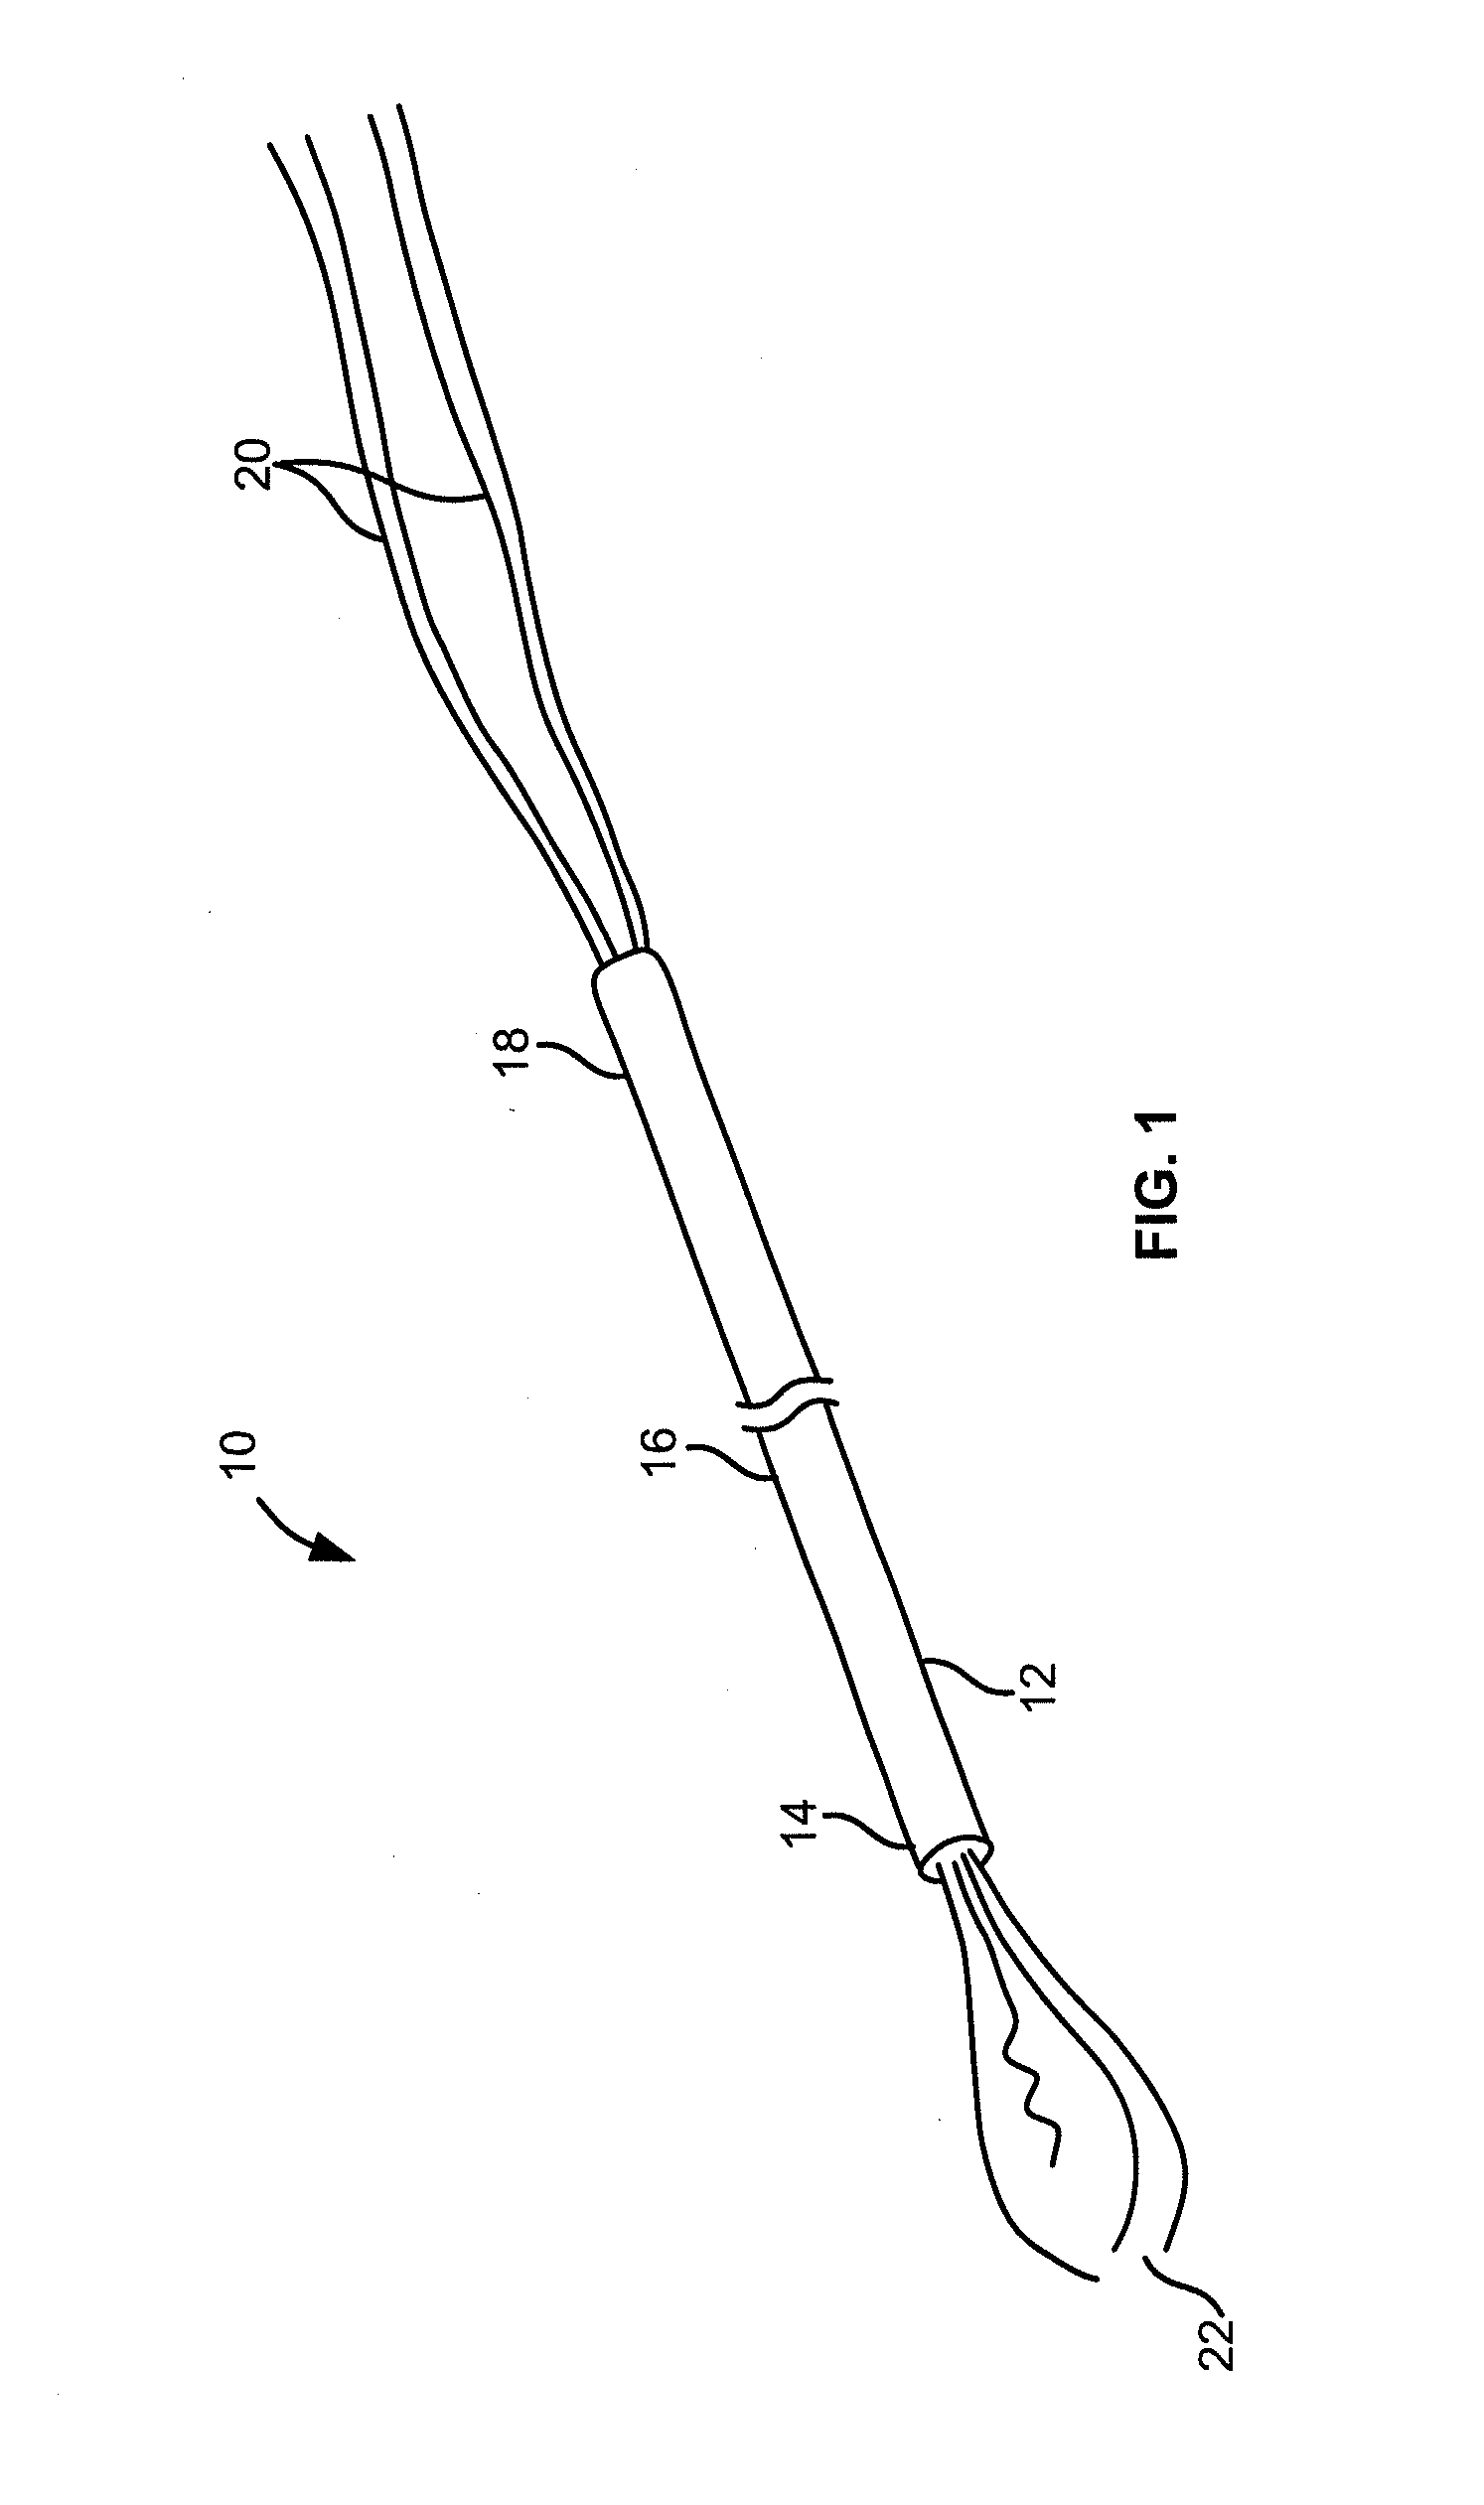 System and method for controlled tissue heating for destruction of cancerous cells